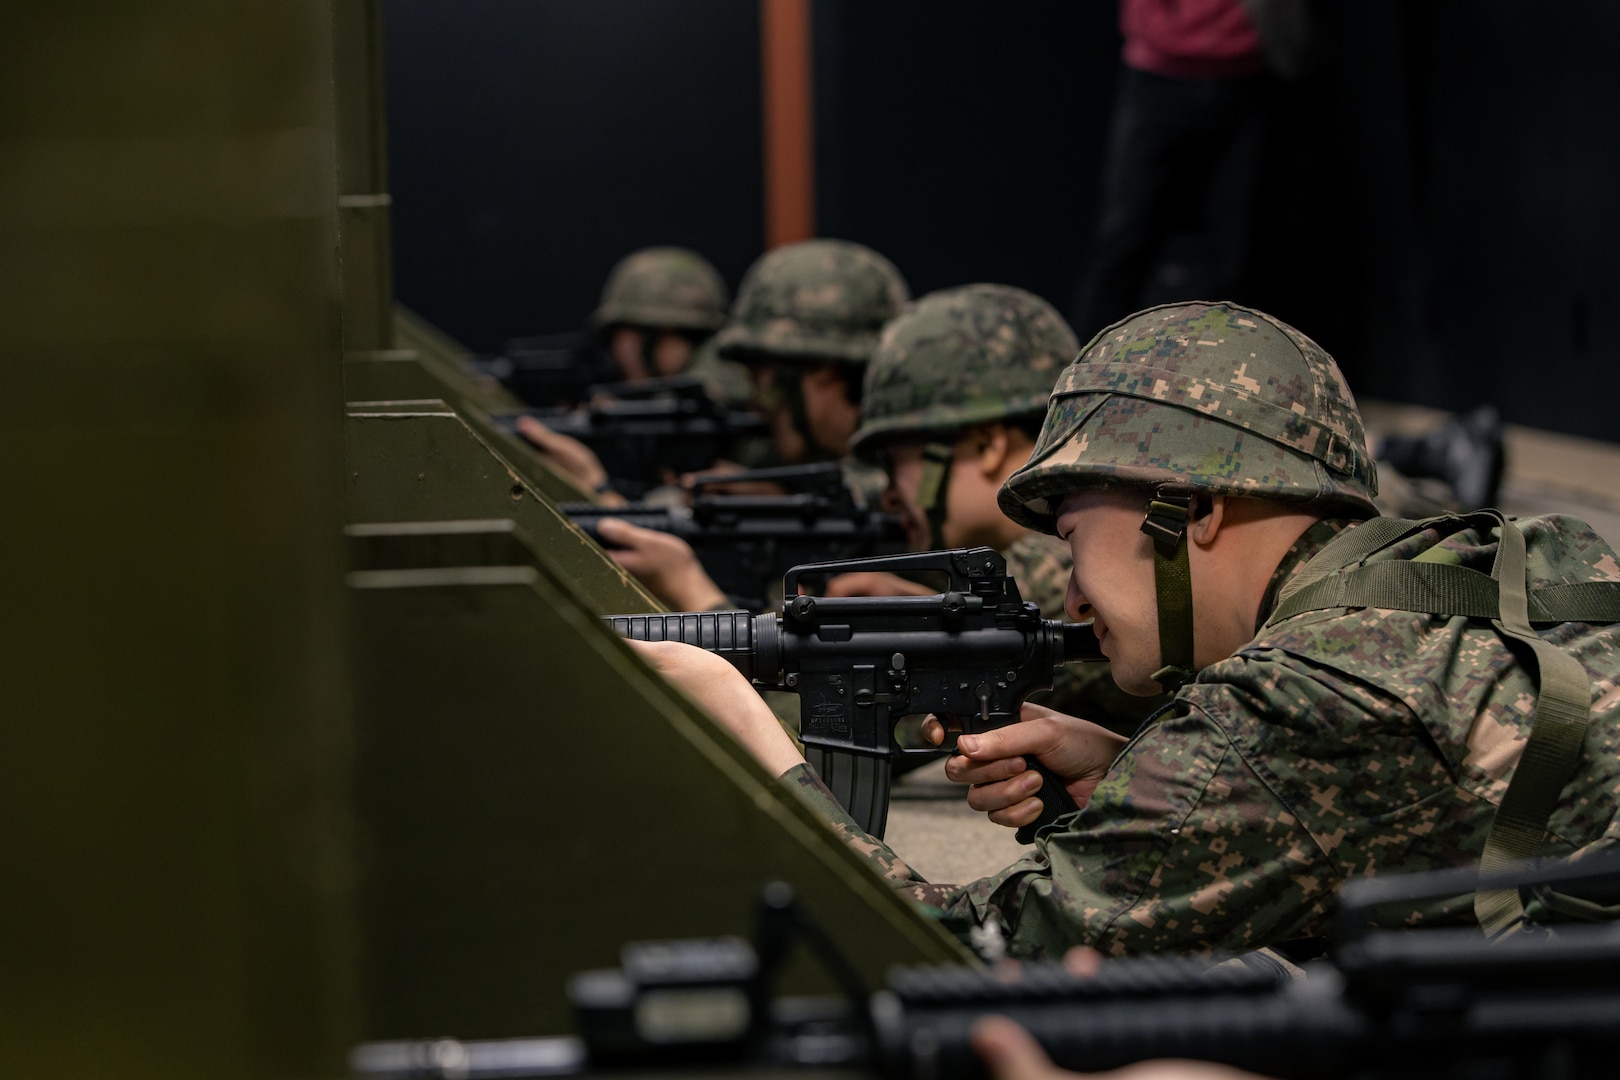 Korean Augmentation to the U.S. Army reserve Soldiers conduct basic rifle marksmanship training on a simulator on U.S. Army Garrison Humphreys, South Korea, Oct. 25, 2023. These KATUSA Soldiers have completed their mandatory service obligation to the Republic of Korea Army, but must undergo periodic refresher training on their wartime mission. (U.S. Army photo by Cpl. Choi, Kang Min)